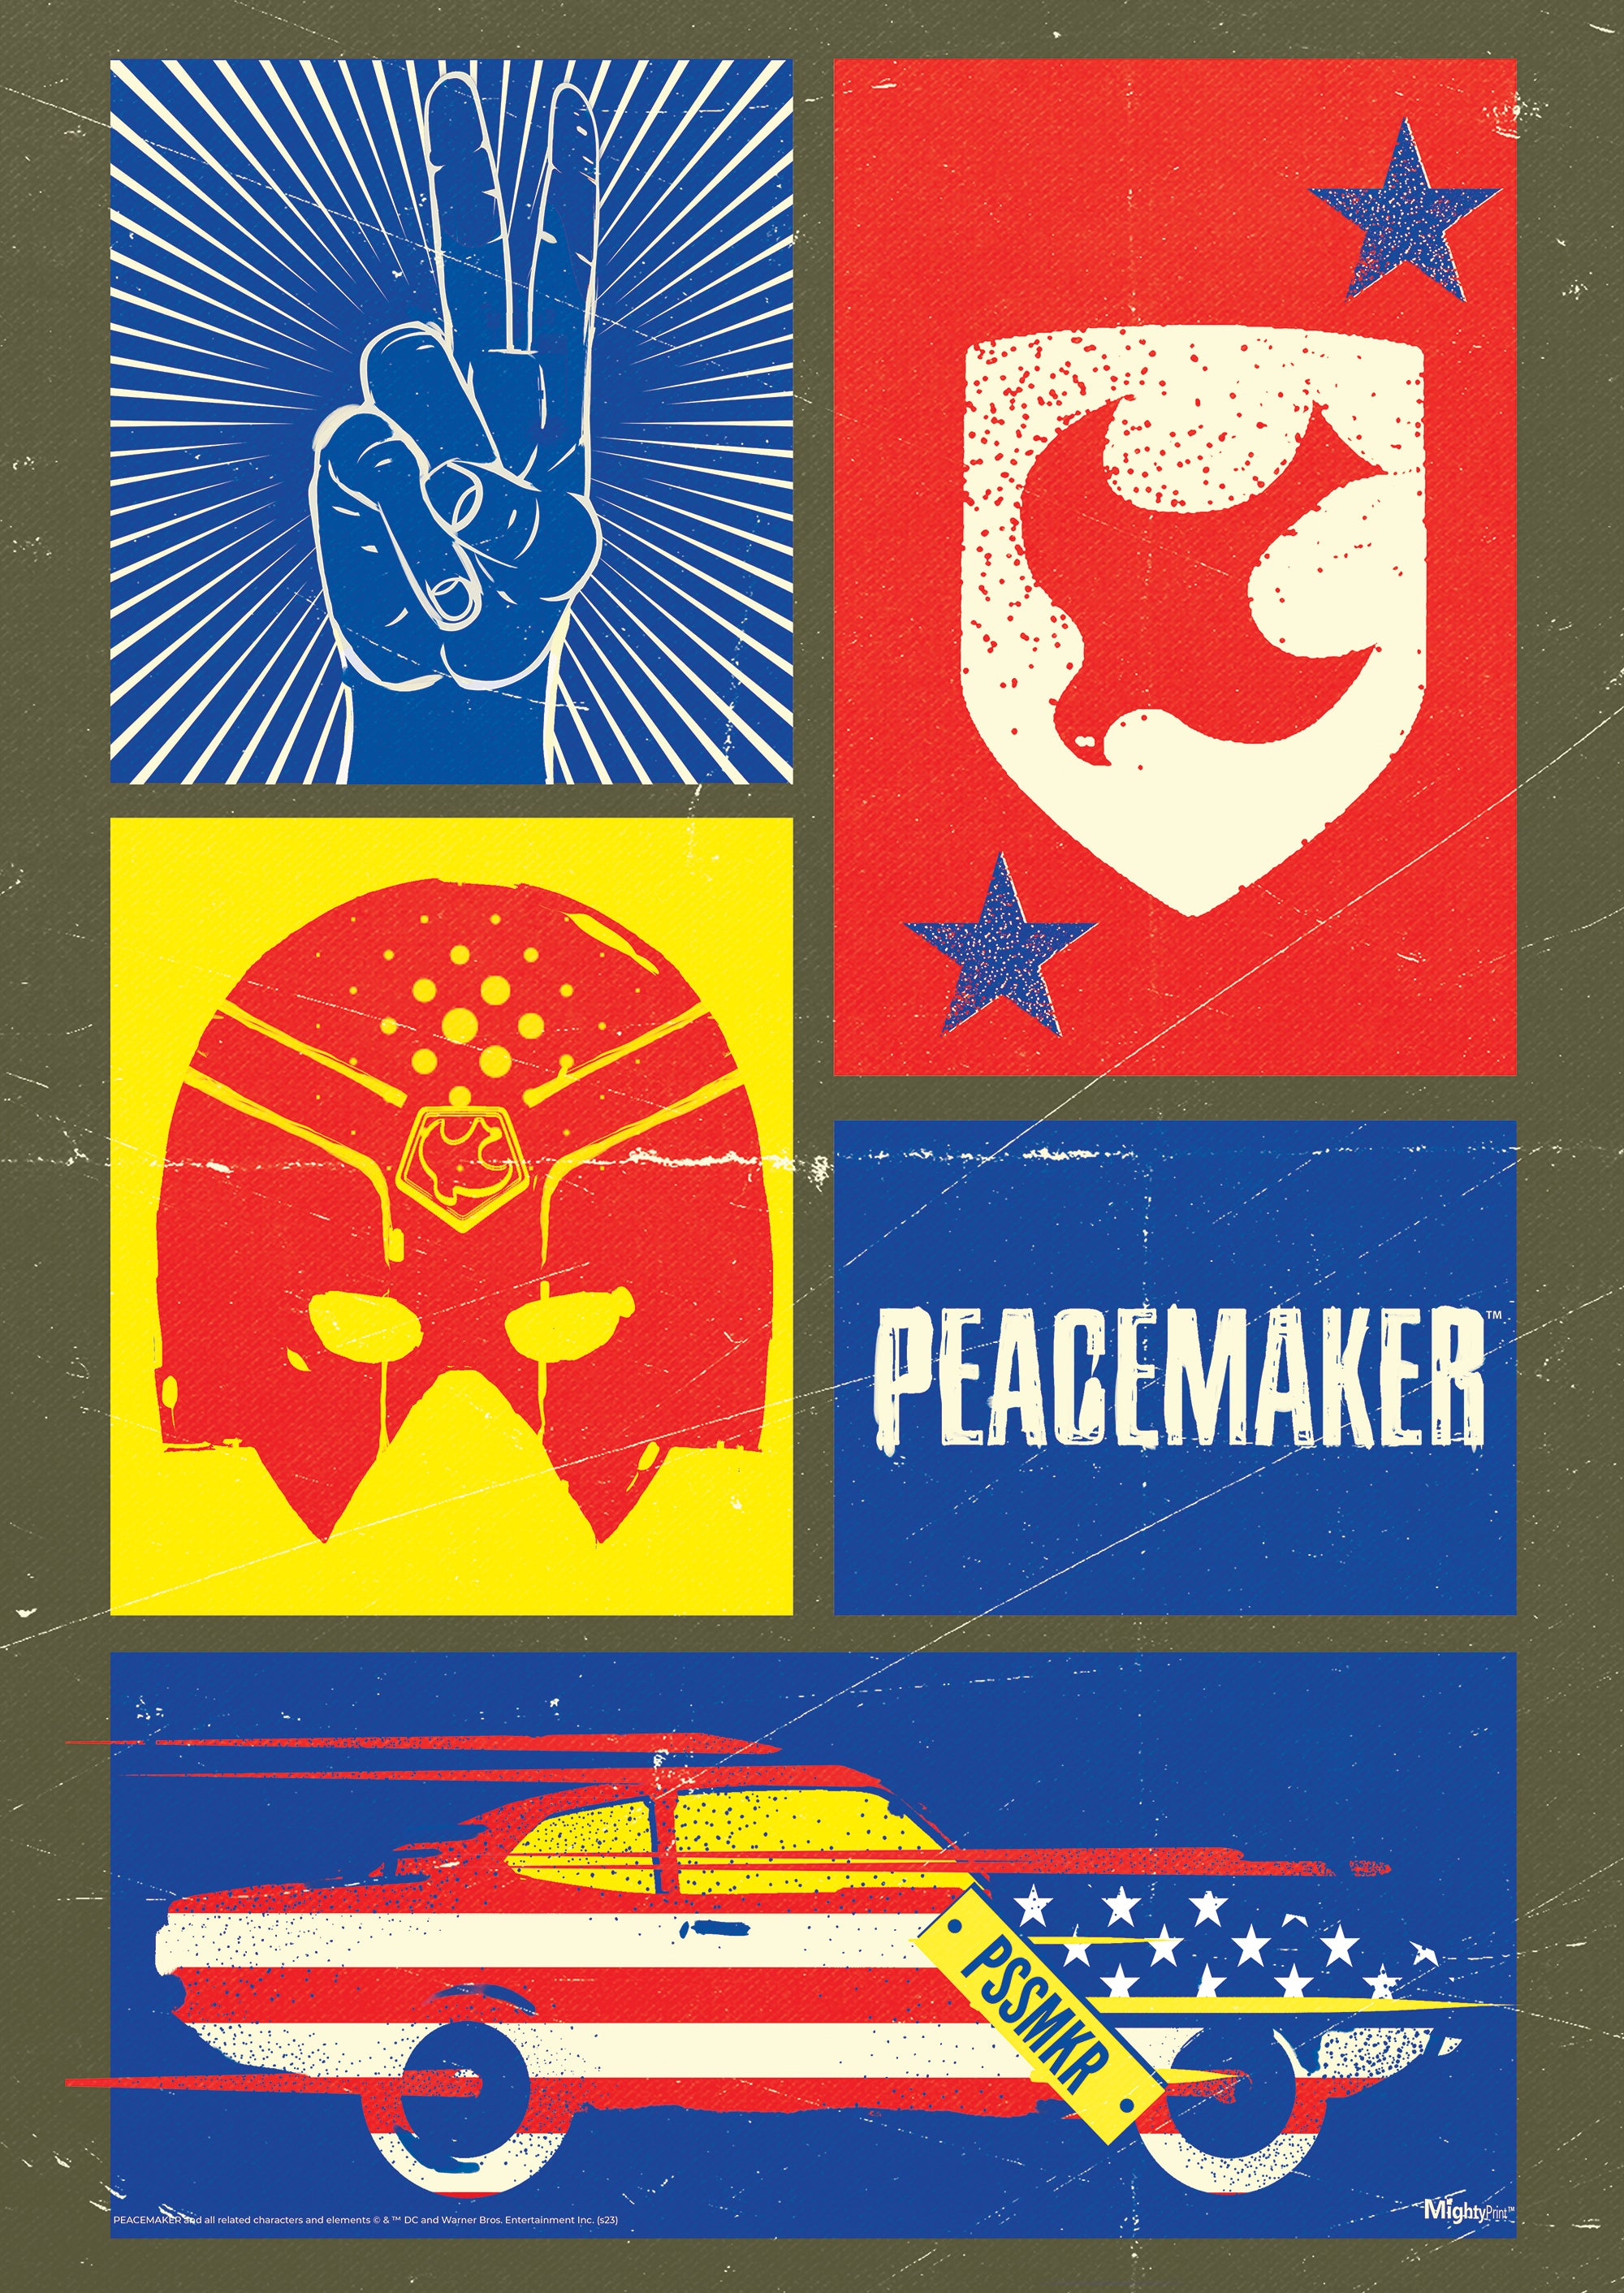 Peacemaker (PSSMKR) MightyPrint™ Wall Art MP17240880